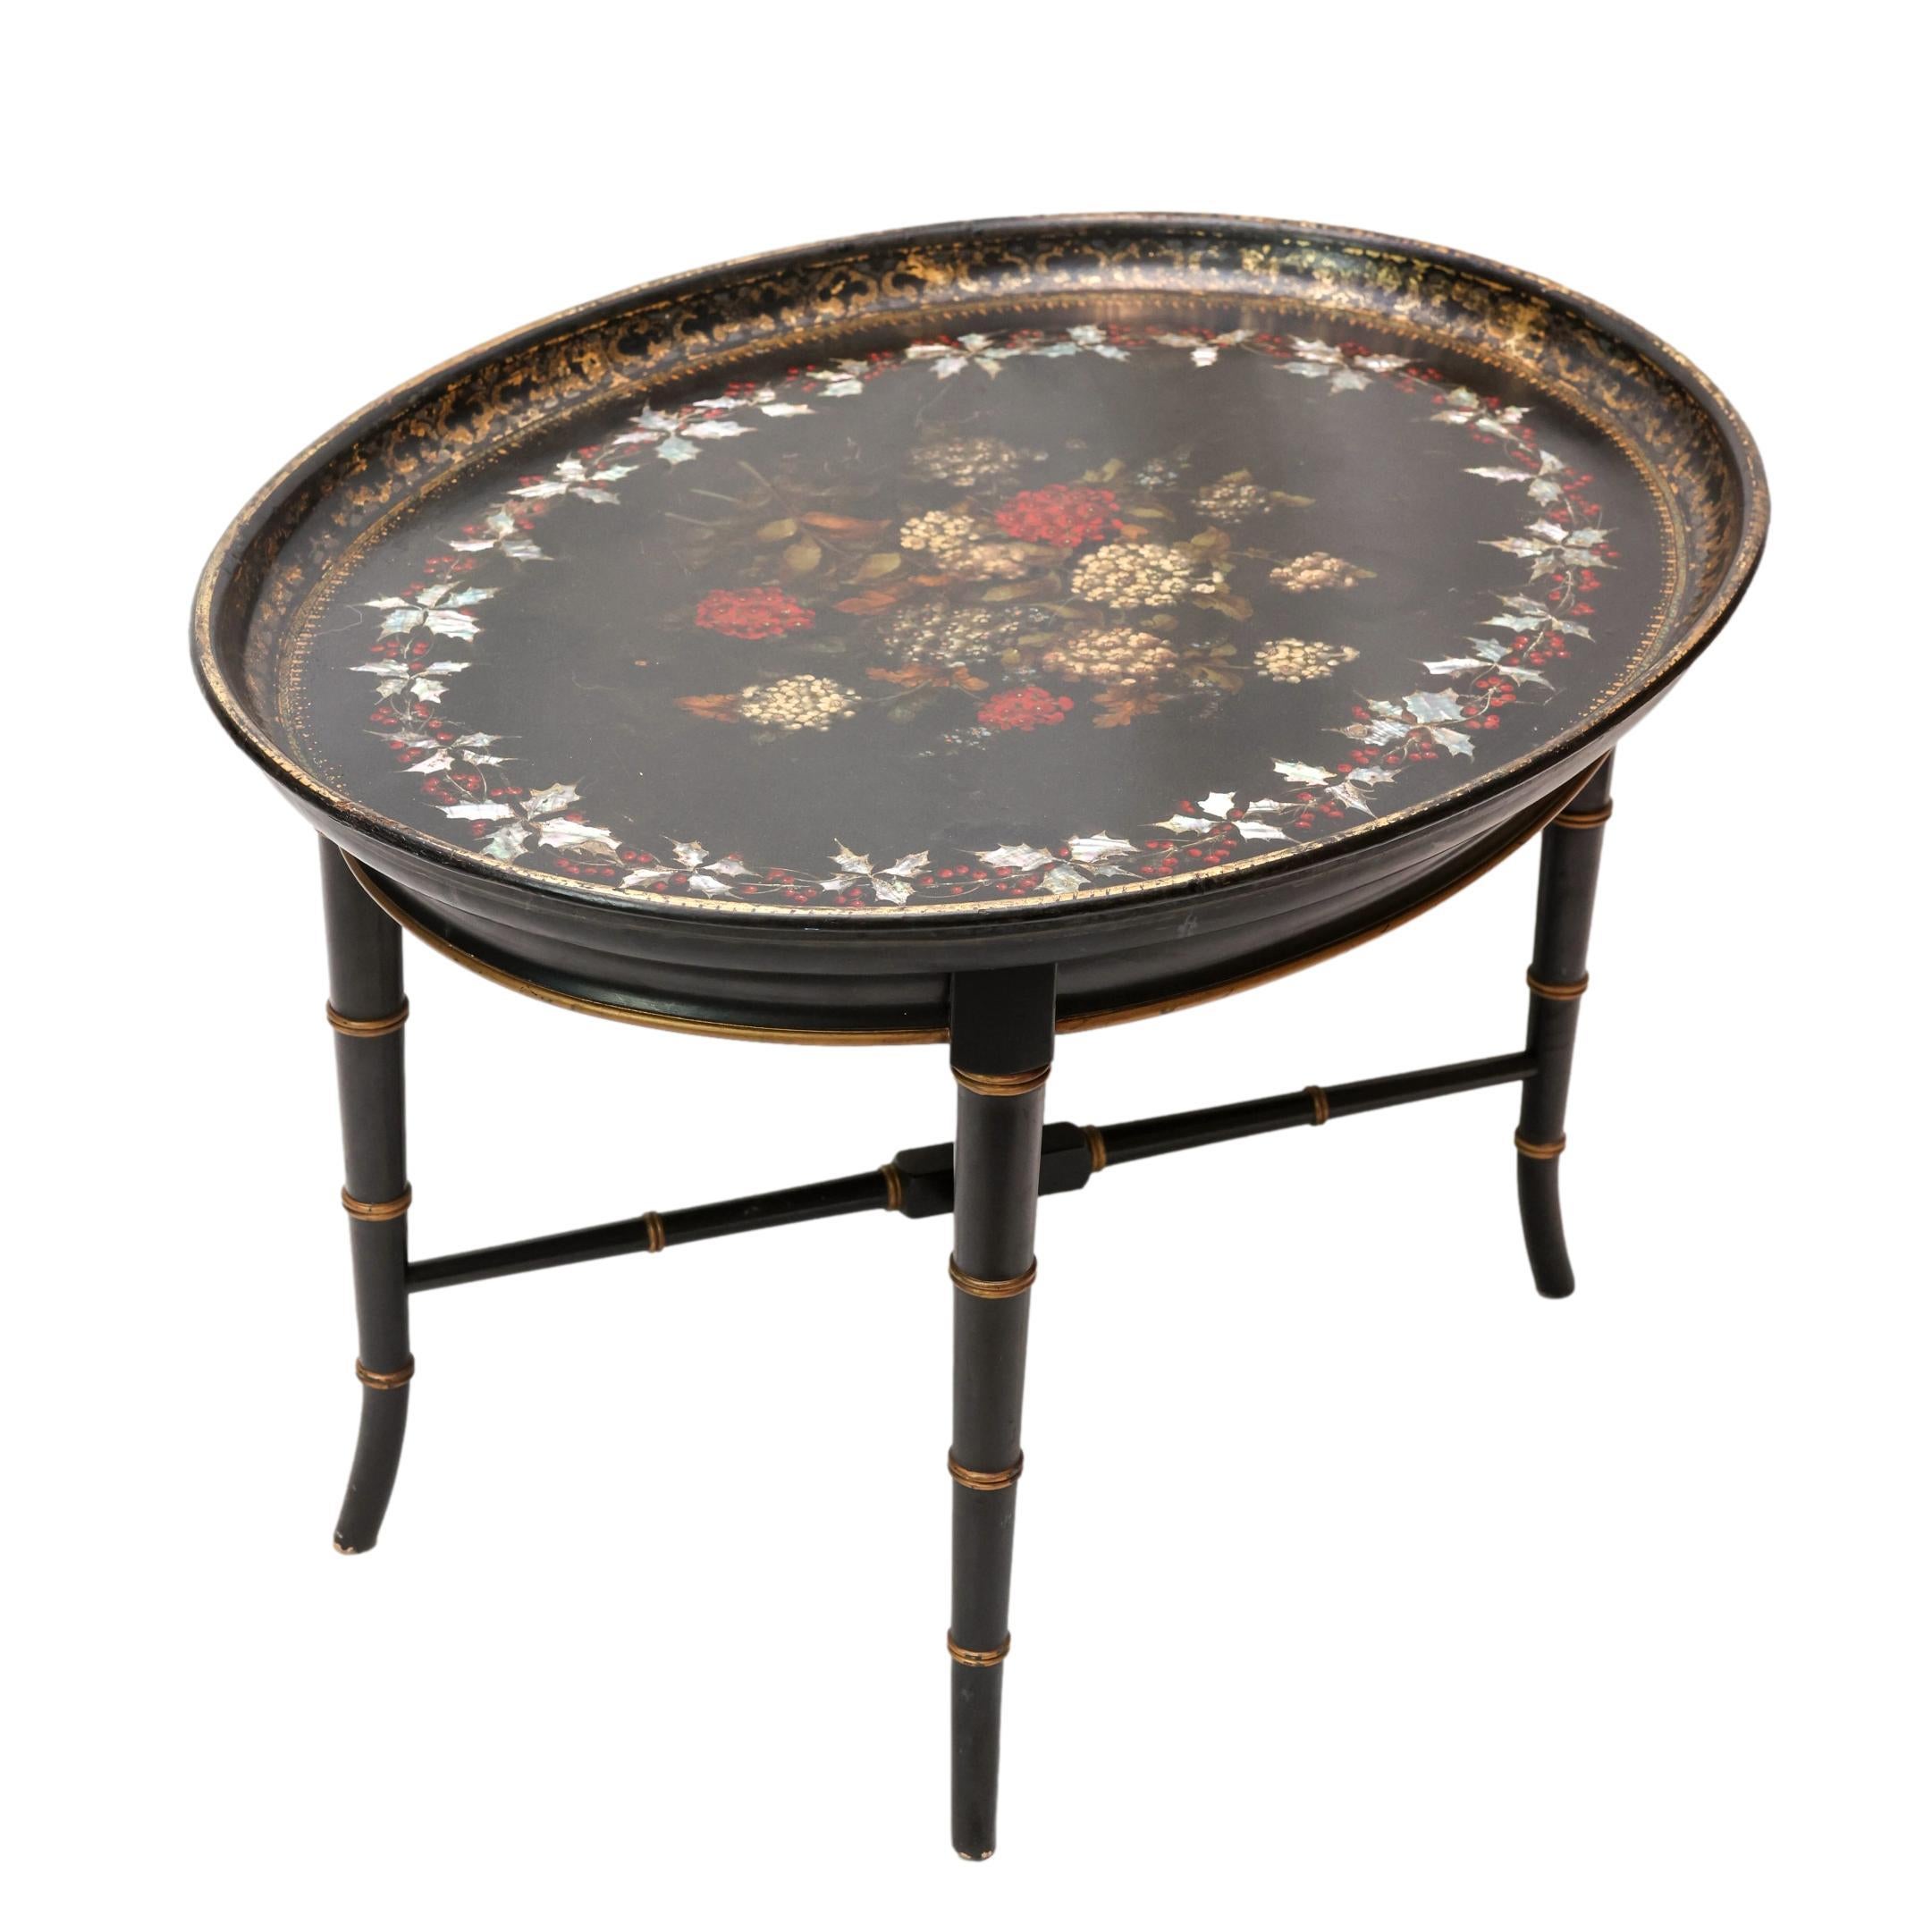 Mother-of-Pearl Inlaid and Ebonized Paper Mache Tray Table, English, ca. 1850 In Good Condition For Sale In Banner Elk, NC